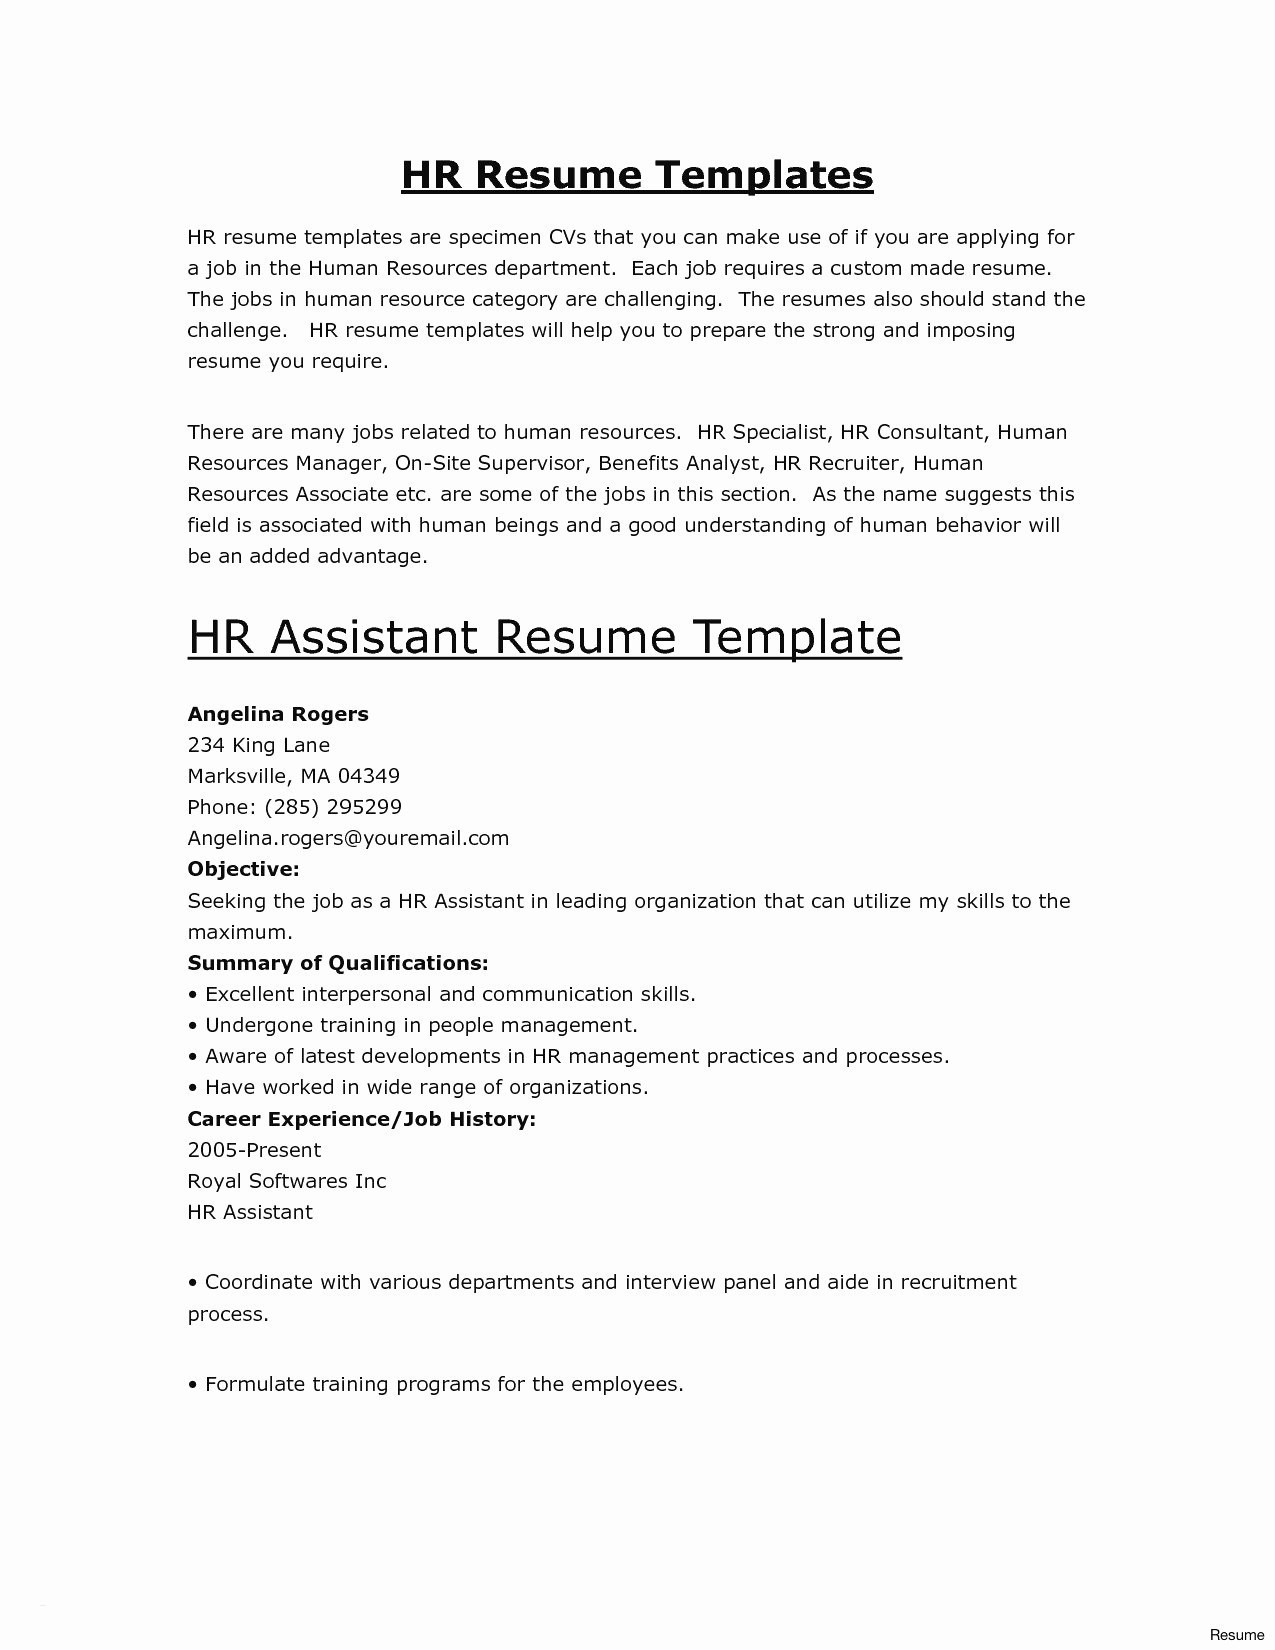 self employment letter template Collection-How Do I Write A Resume Best Self Employed Resume New Luxury Examples Resumes Ecologist 1-i